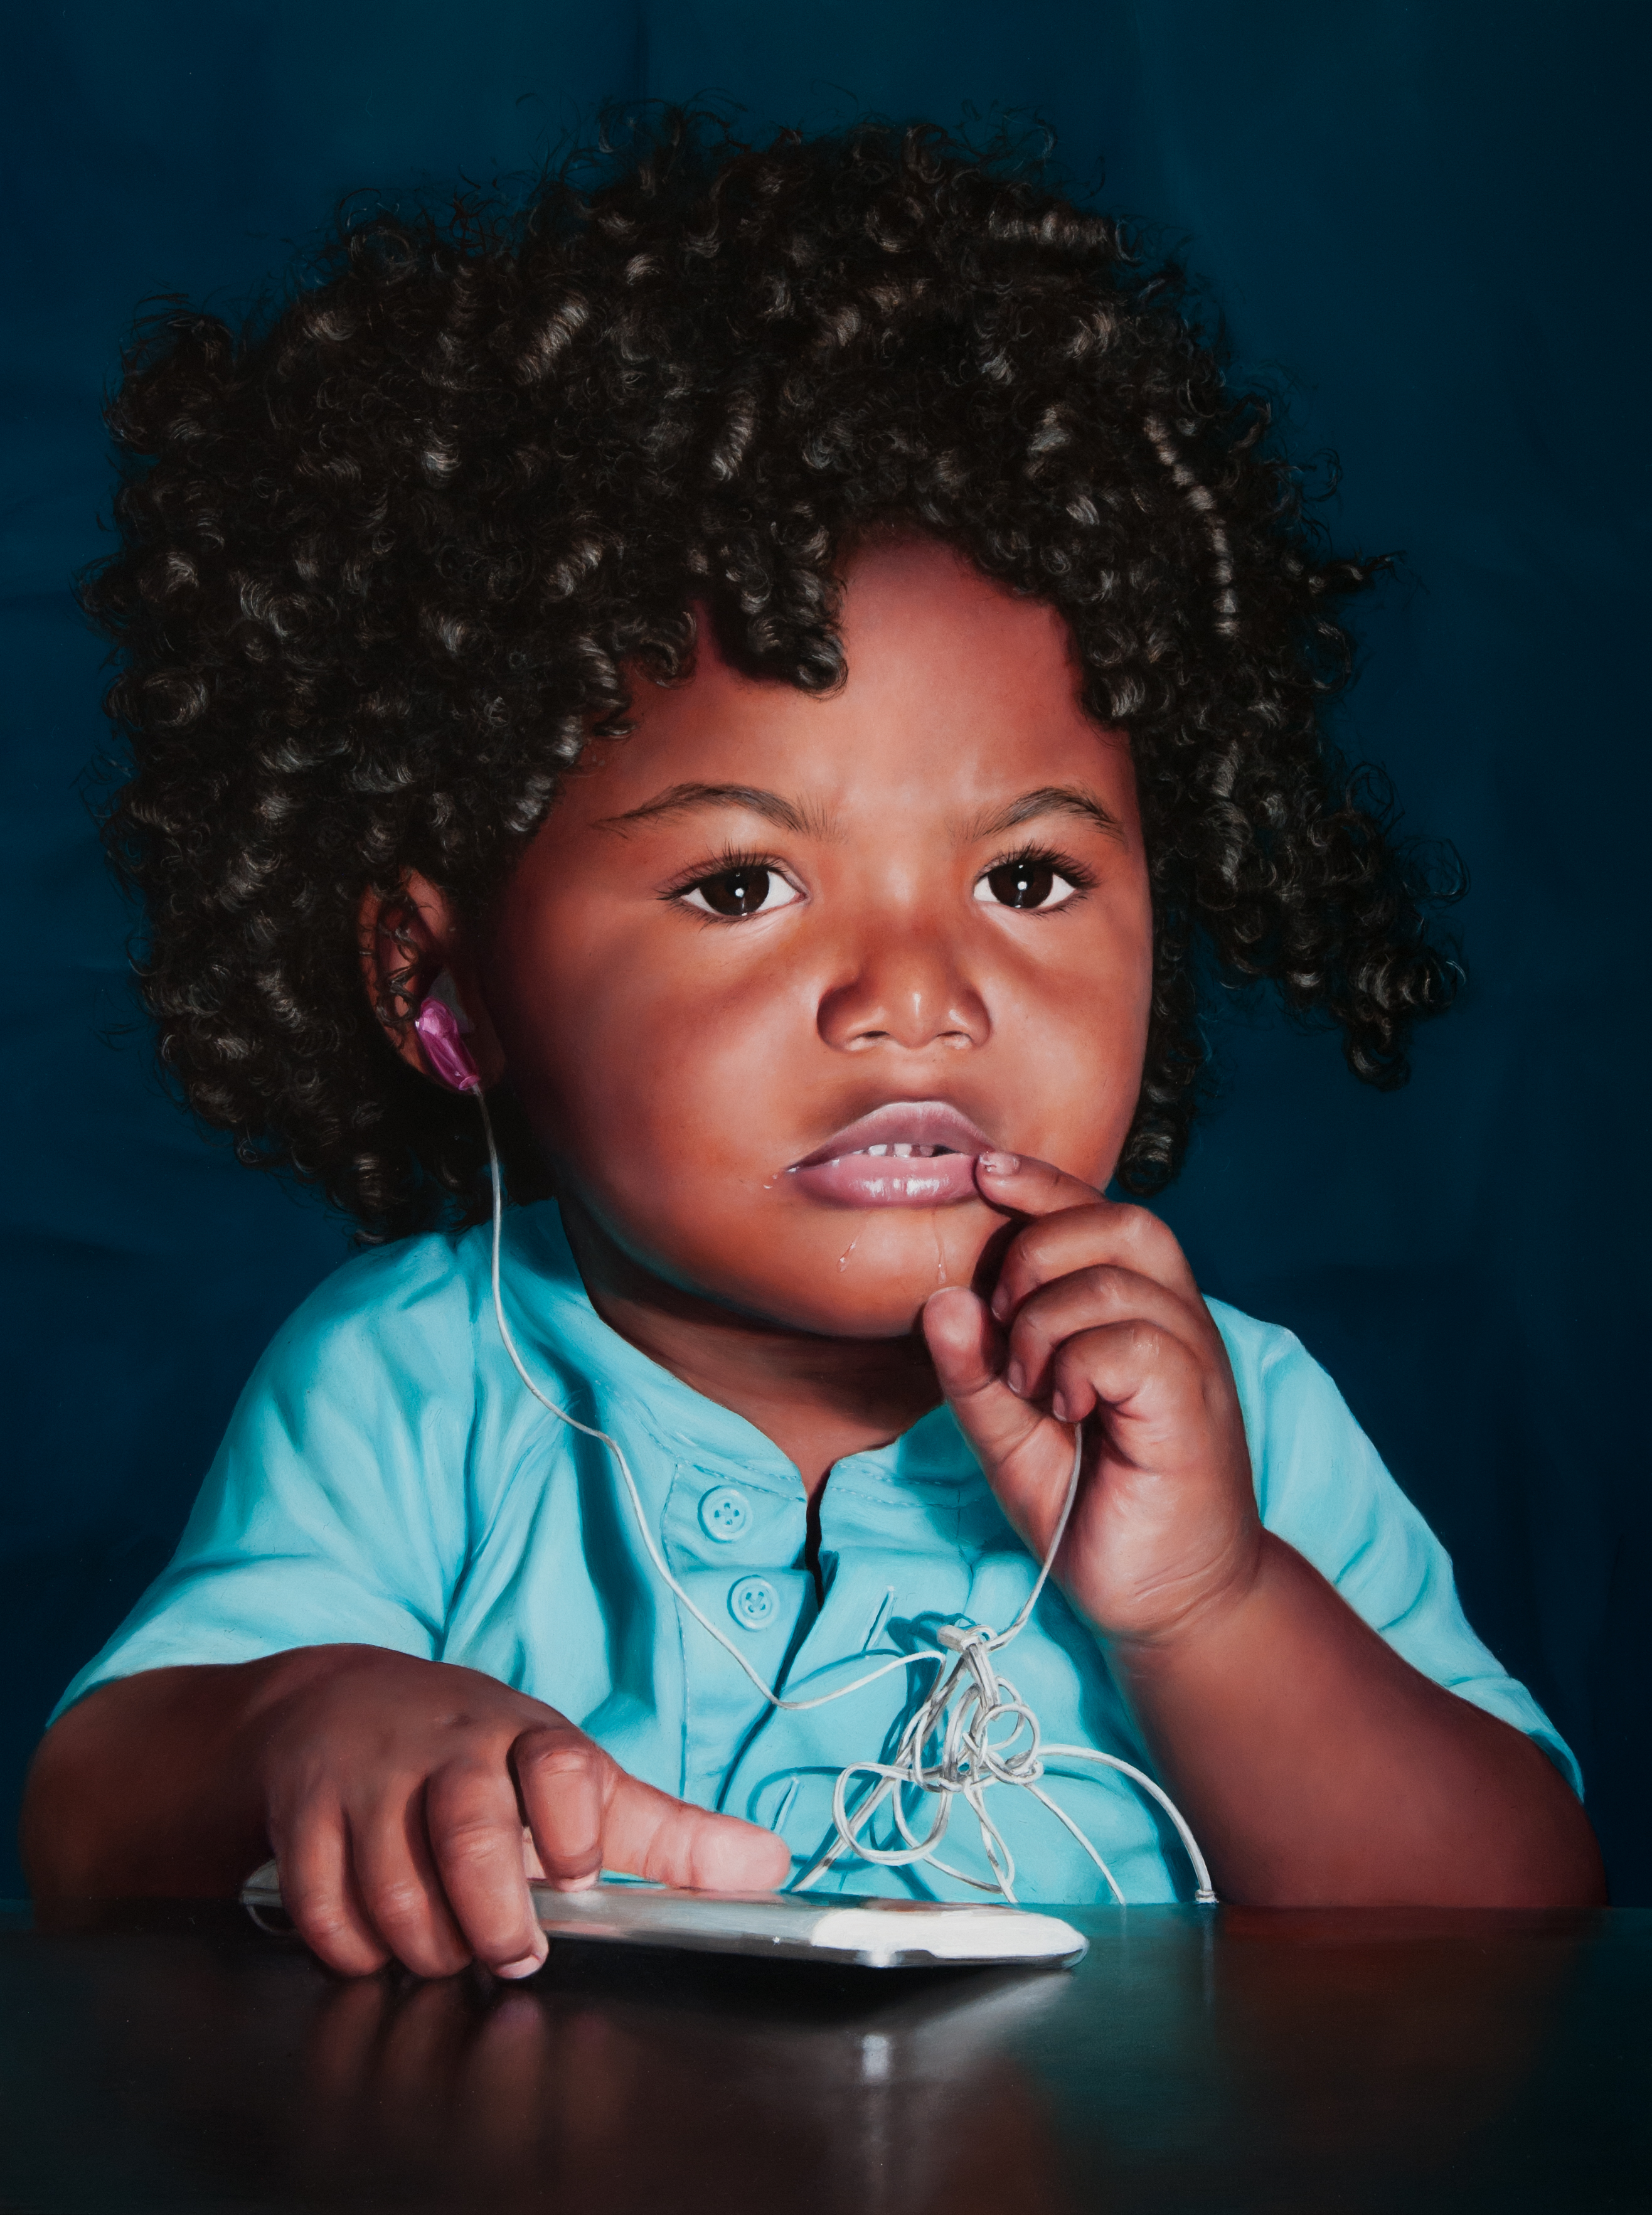 Black male child with curly shoulder length hair. Vacant stare with drool coming out of his mouth. Subject is wearing a aquamarine button up shirt with a pink earphone in his ear. 